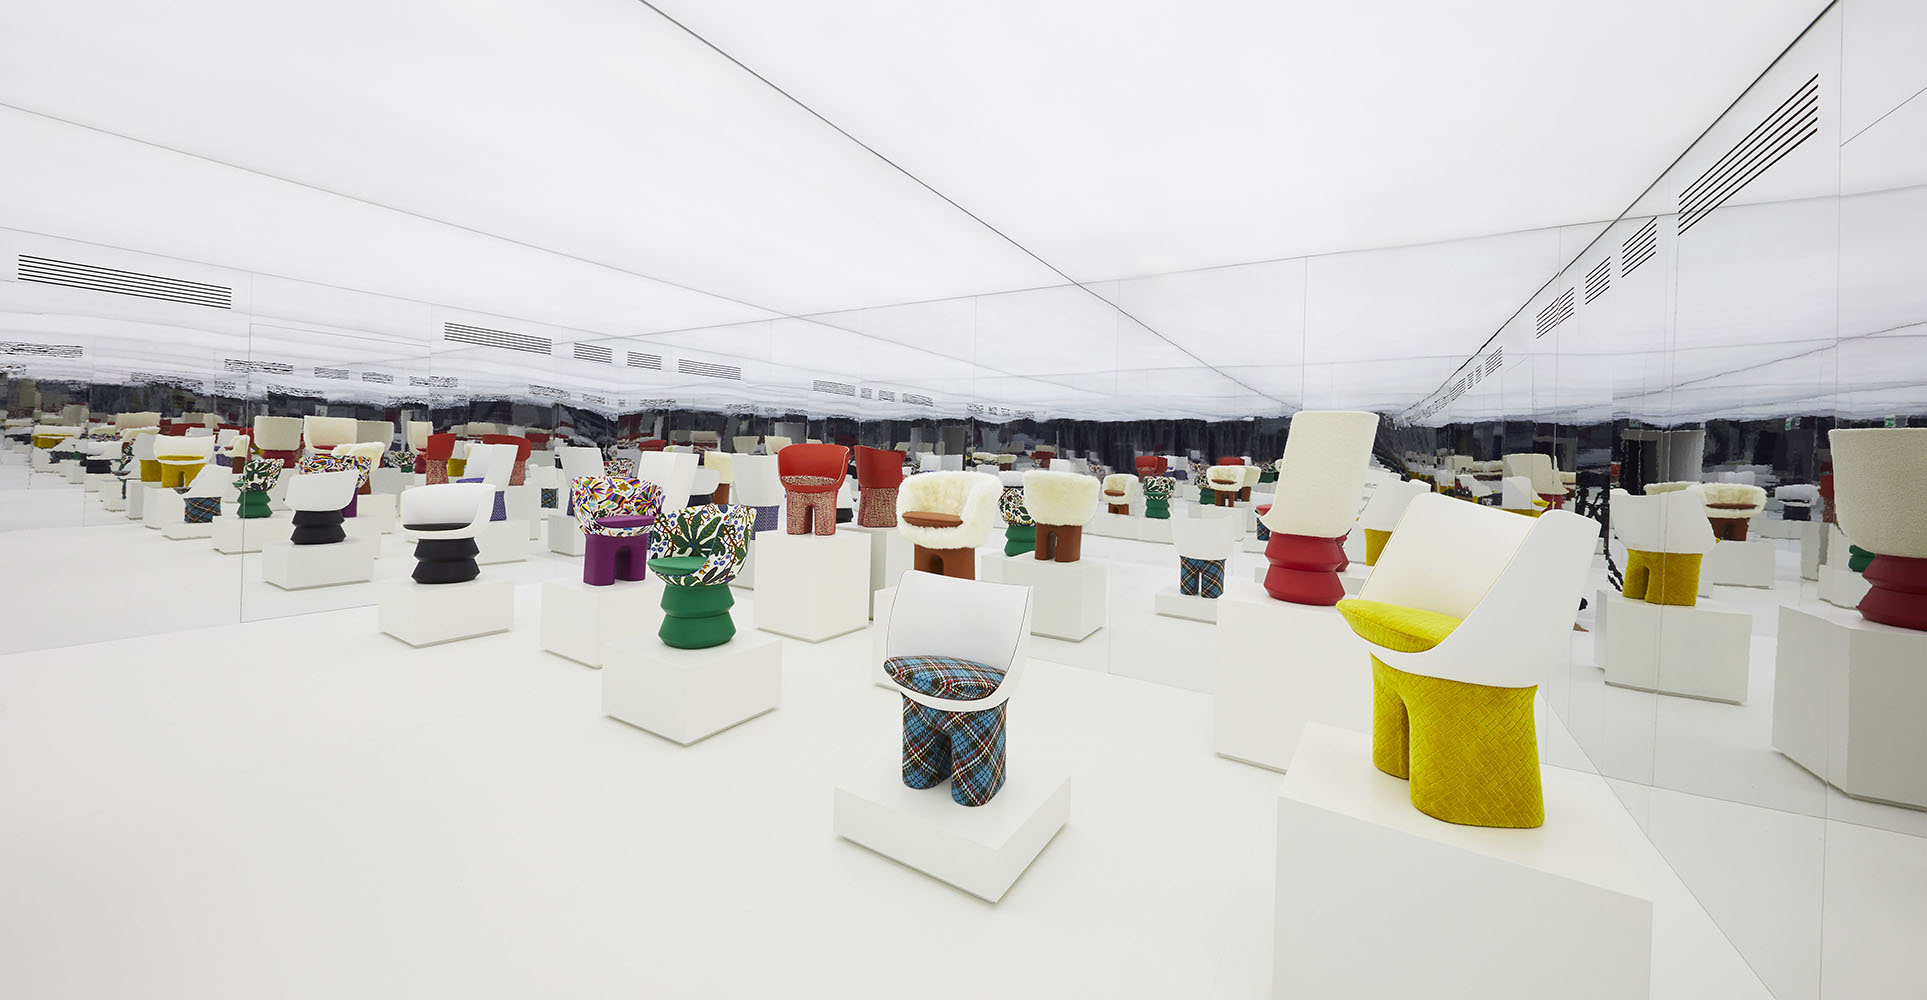 Louis Vuitton Wins Art Basel With a Fur Cocoon Chair